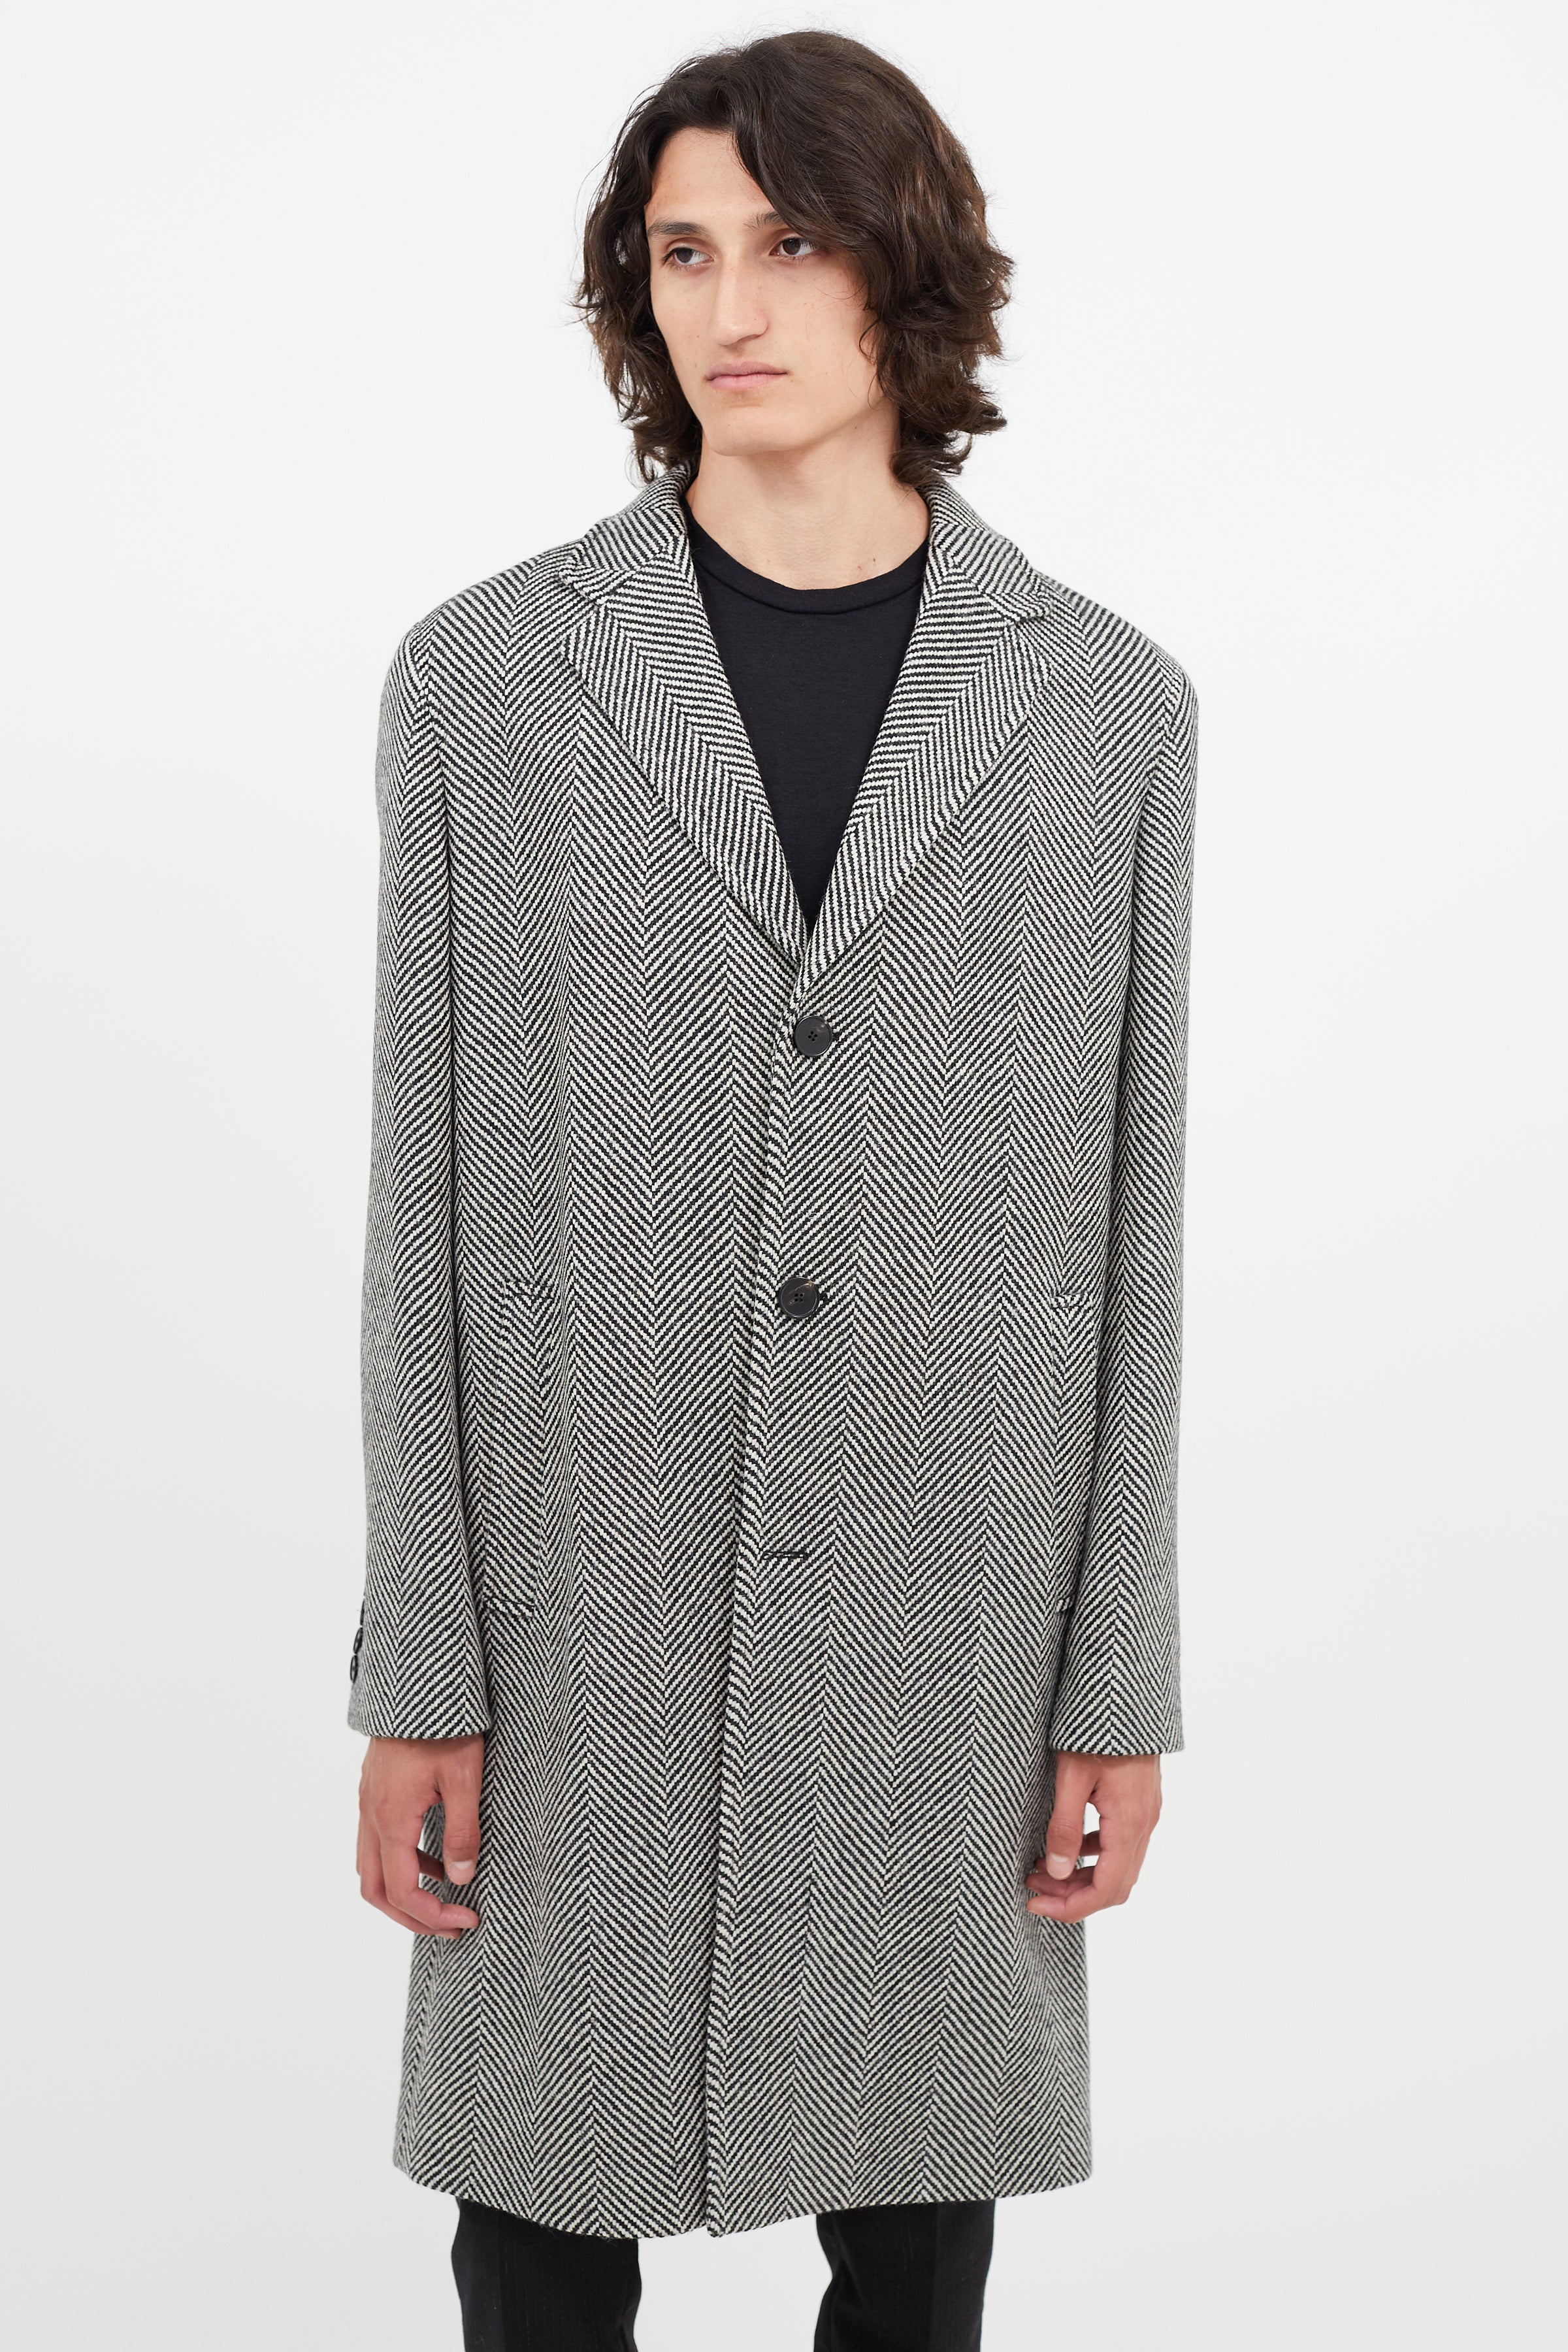 The Kooples // Black & White Wool Houndstooth Coat – VSP Consignment